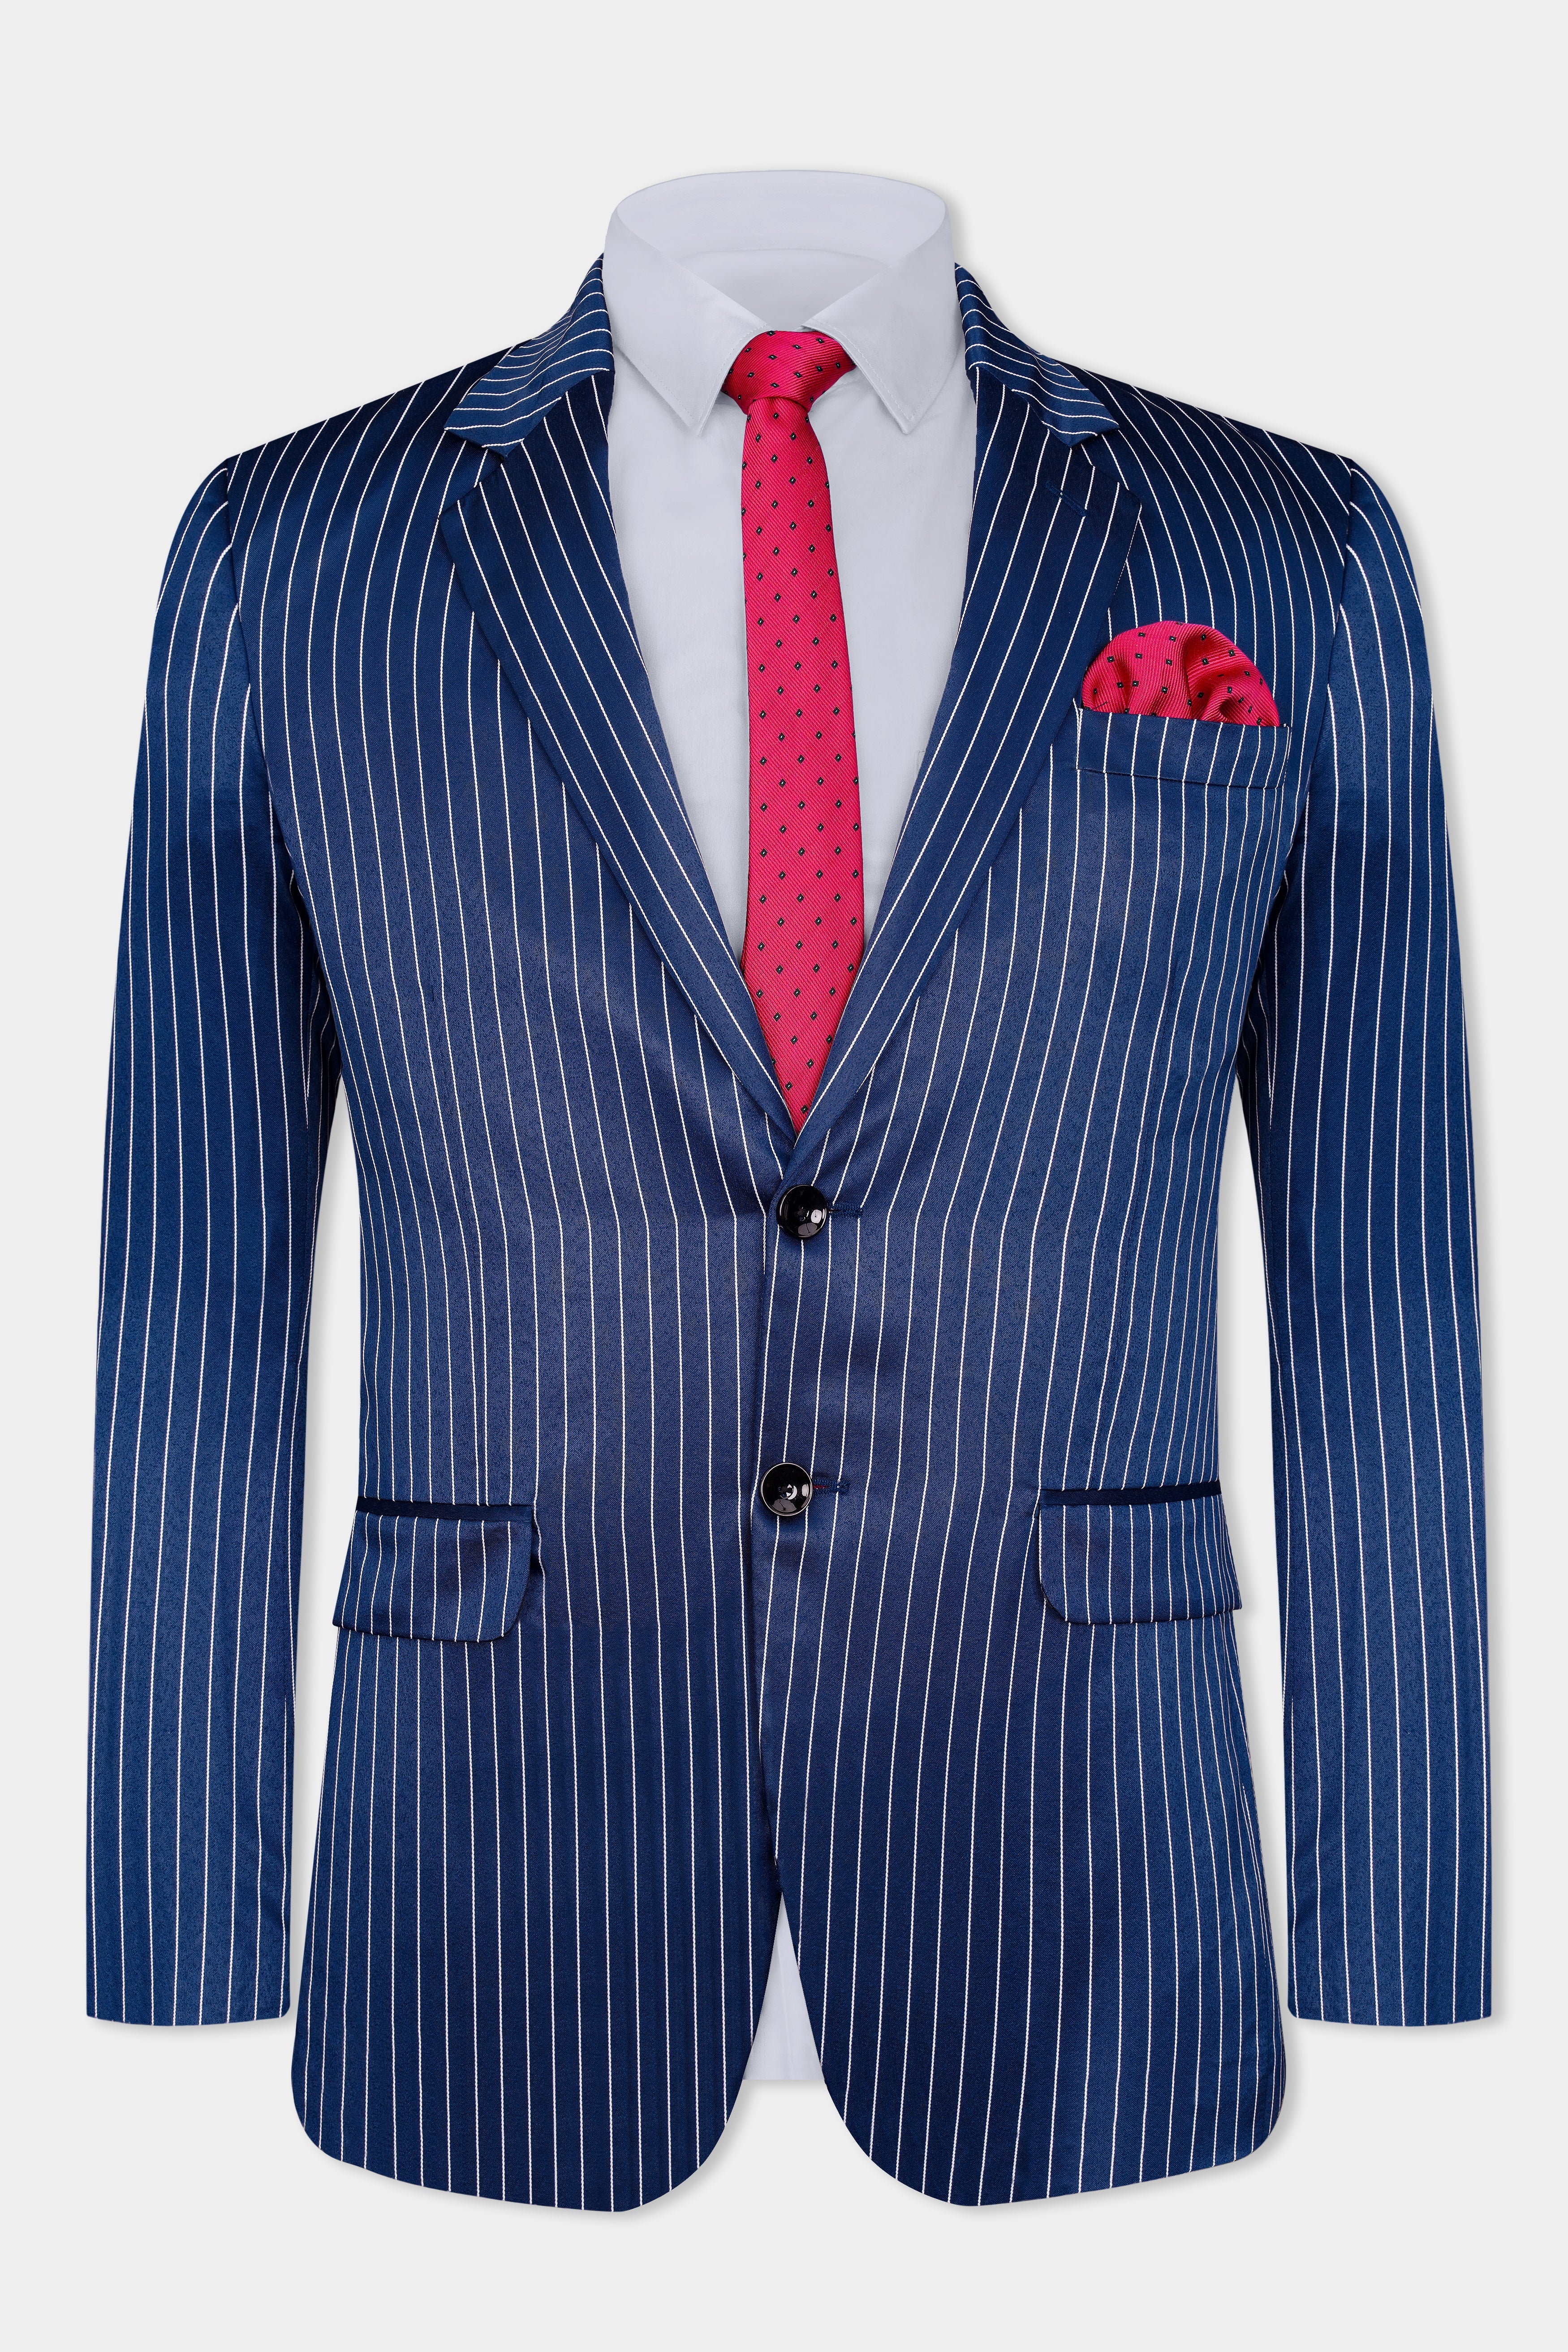 Cinder Blue and White Striped Wool Rich Suit ST3096-SB-36, ST3096-SB-38, ST3096-SB-40, ST3096-SB-42, ST3096-SB-44, ST3096-SB-46, ST3096-SB-48, ST3096-SB-50, ST3096-SB-52, ST3096-SB-54, ST3096-SB-56, ST3096-SB-58, ST3096-SB-60